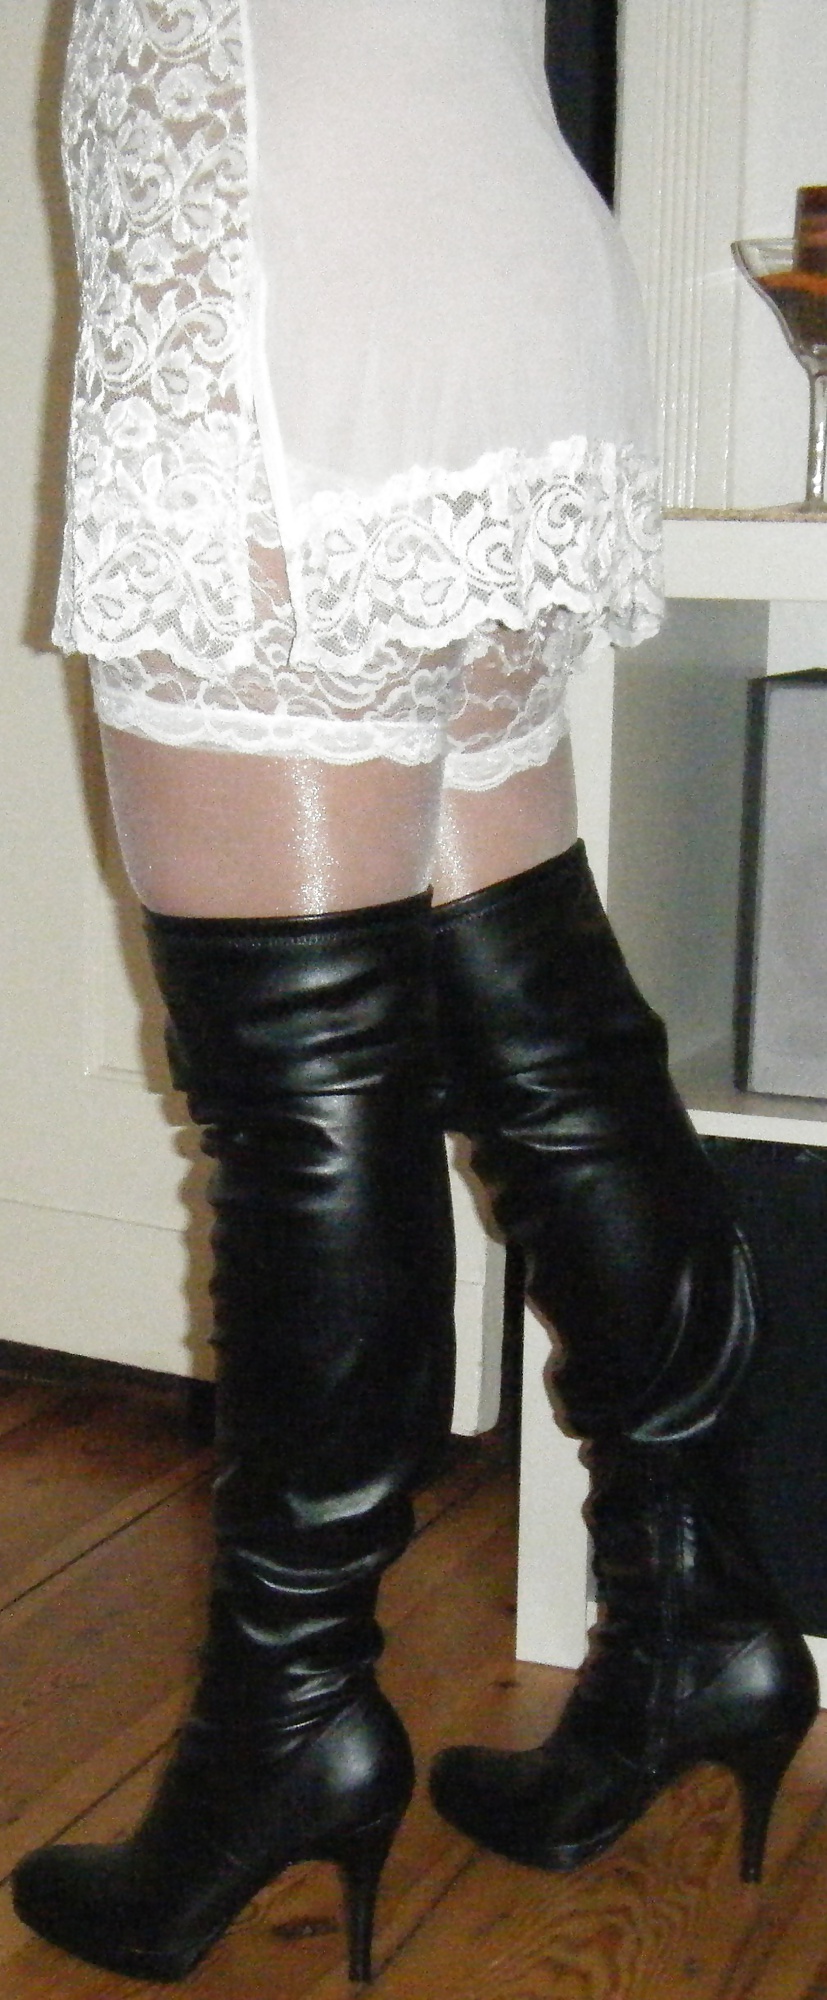 White Stockings in Overkneeboots pict gal